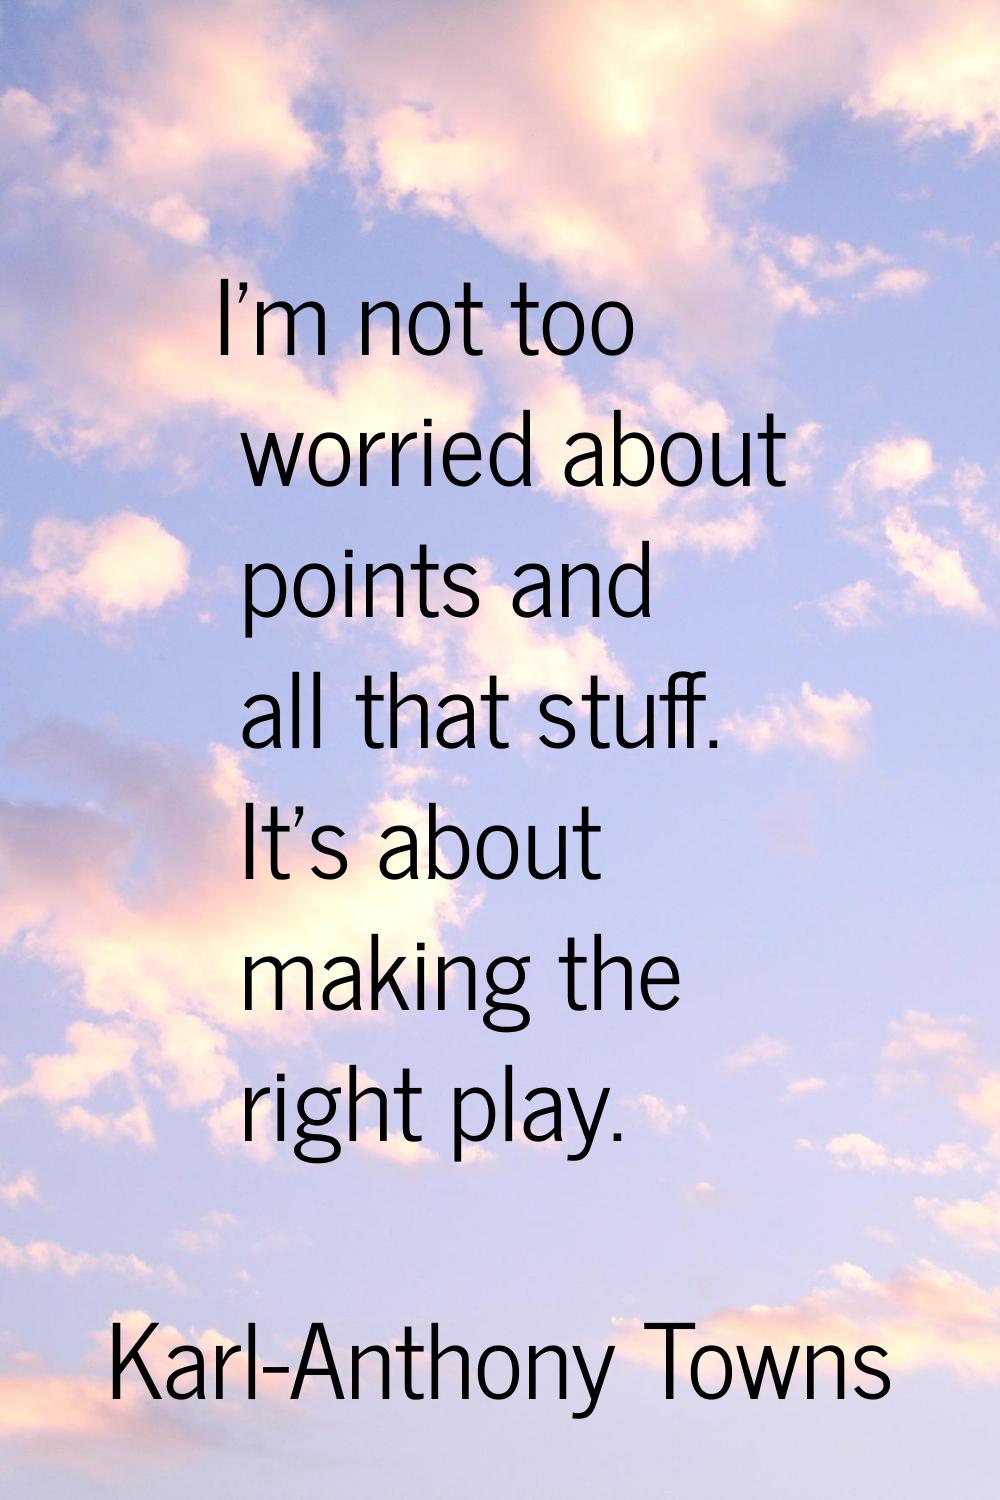 I'm not too worried about points and all that stuff. It's about making the right play.